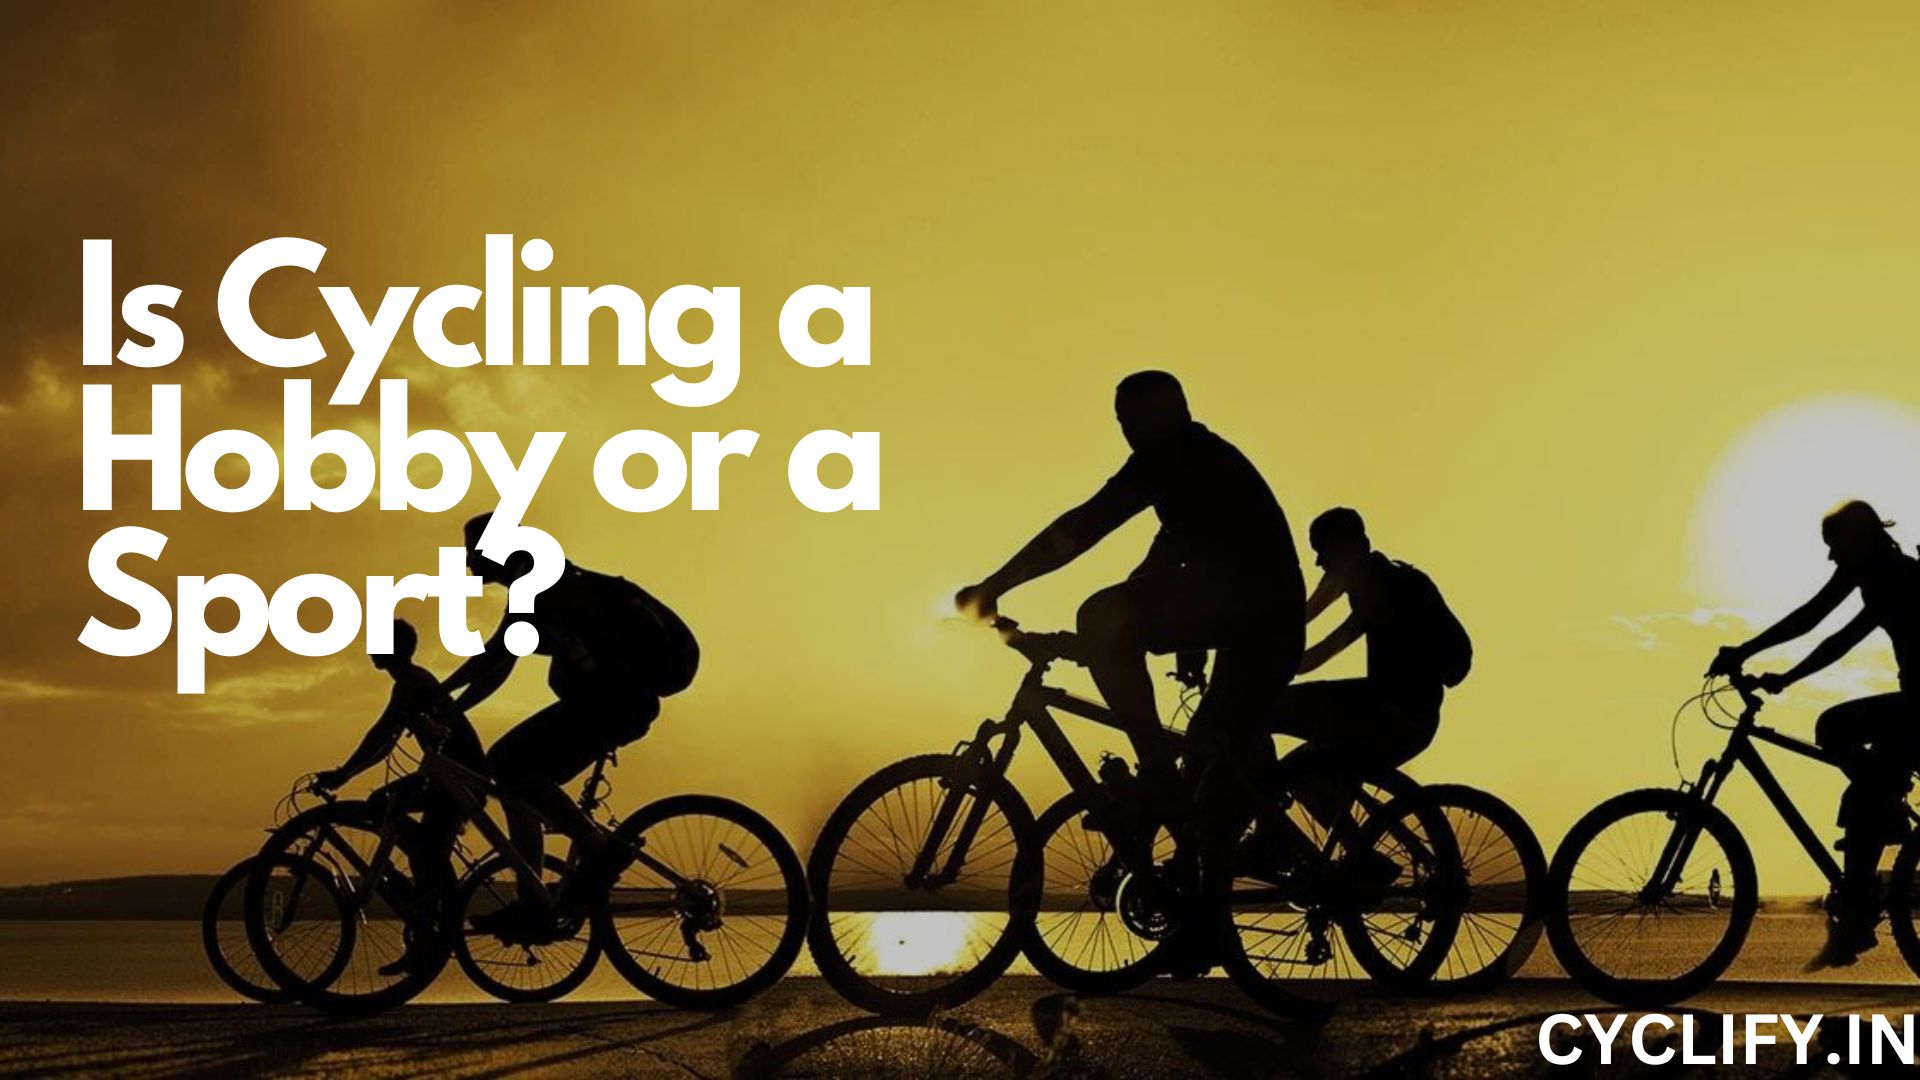 Is Cycling a Hobby or a Sport?